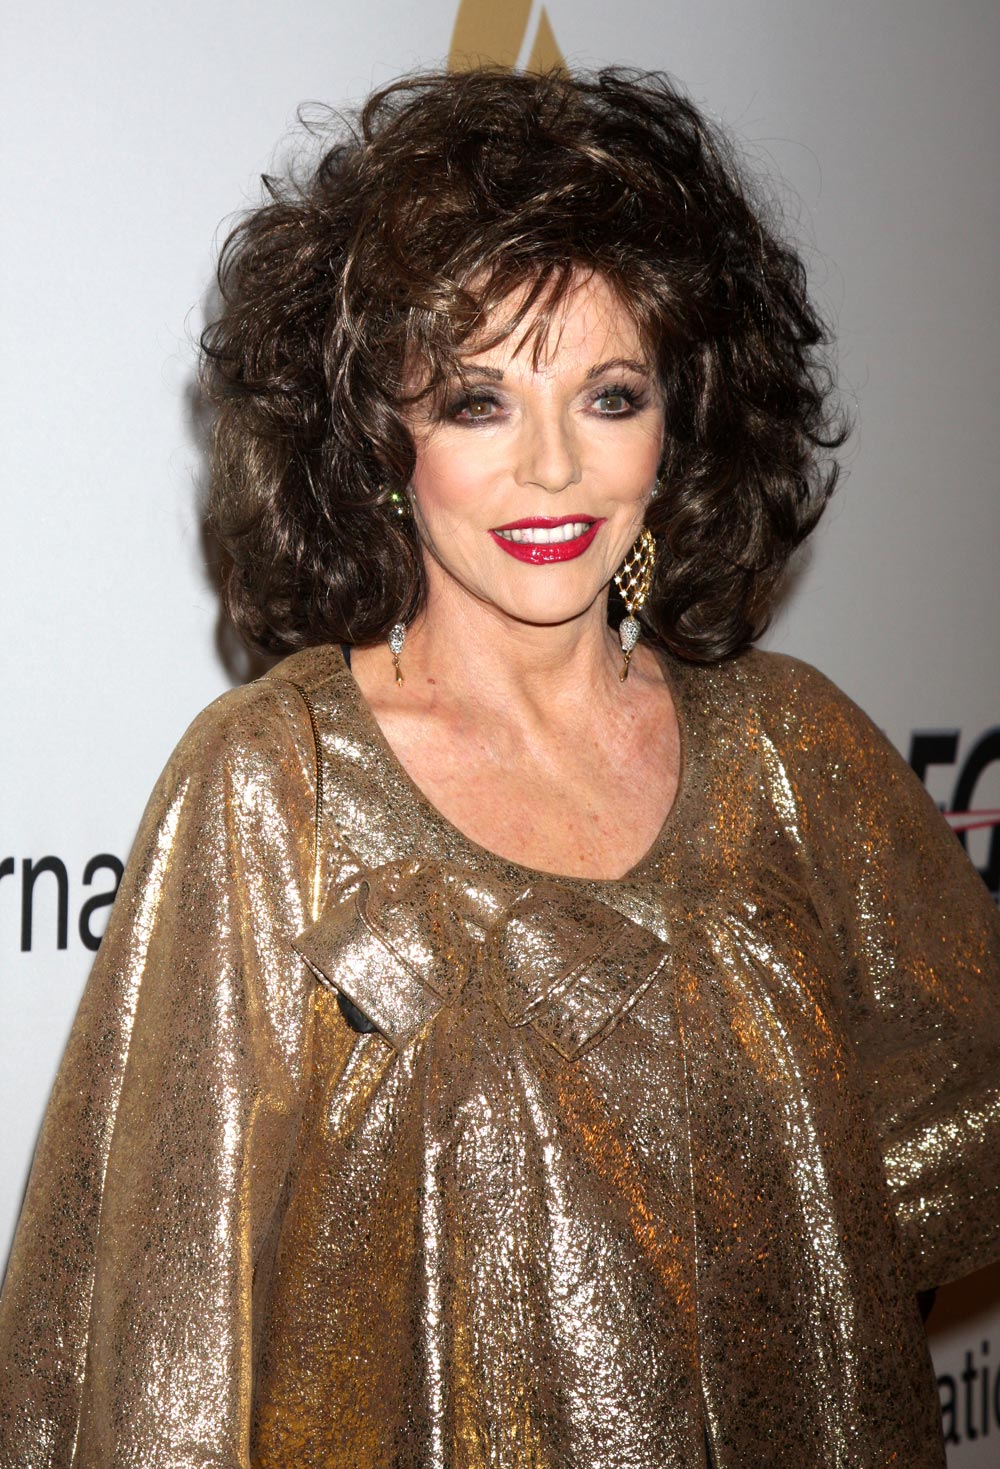 Joan Collins gives sexy aging